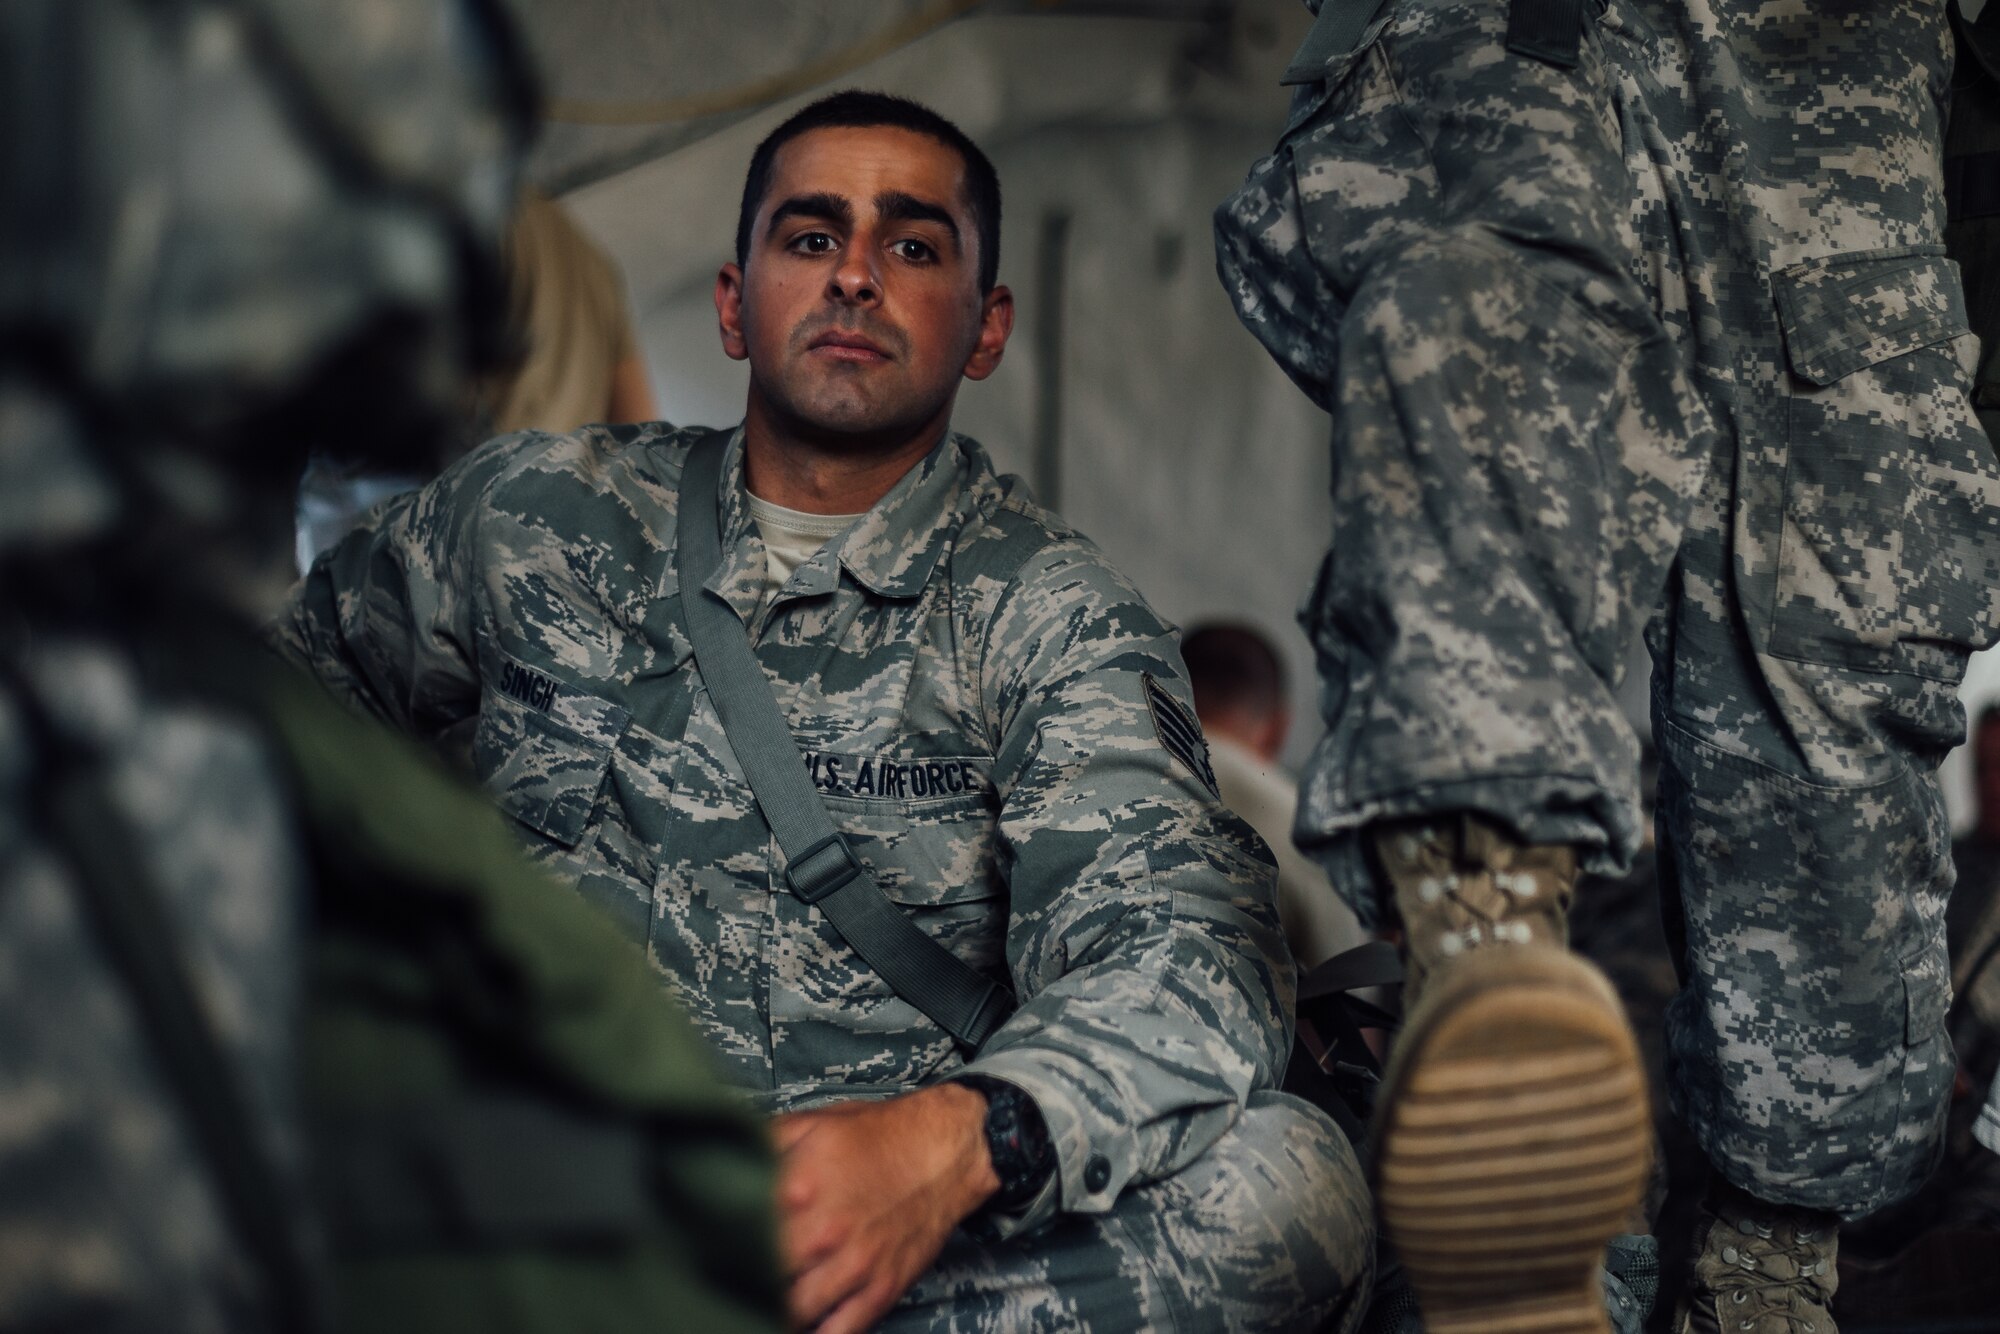 Staff Sgt. Remeet Singh, 446th Aeromedical Staging Squadron Expert Field Medic Badge candidate, waits in a holding tent during the EFMB course at Joint Base Lewis-McChord, Wash., Sept. 24, 2015. The EFMB is the non-combat equivalent of the Combat Medical Badge and is awarded to medical personnel of the U.S. military who successfully complete a set of qualification tests. (U.S. Air Force photo by Senior Airman Jordan Castelan/Released)